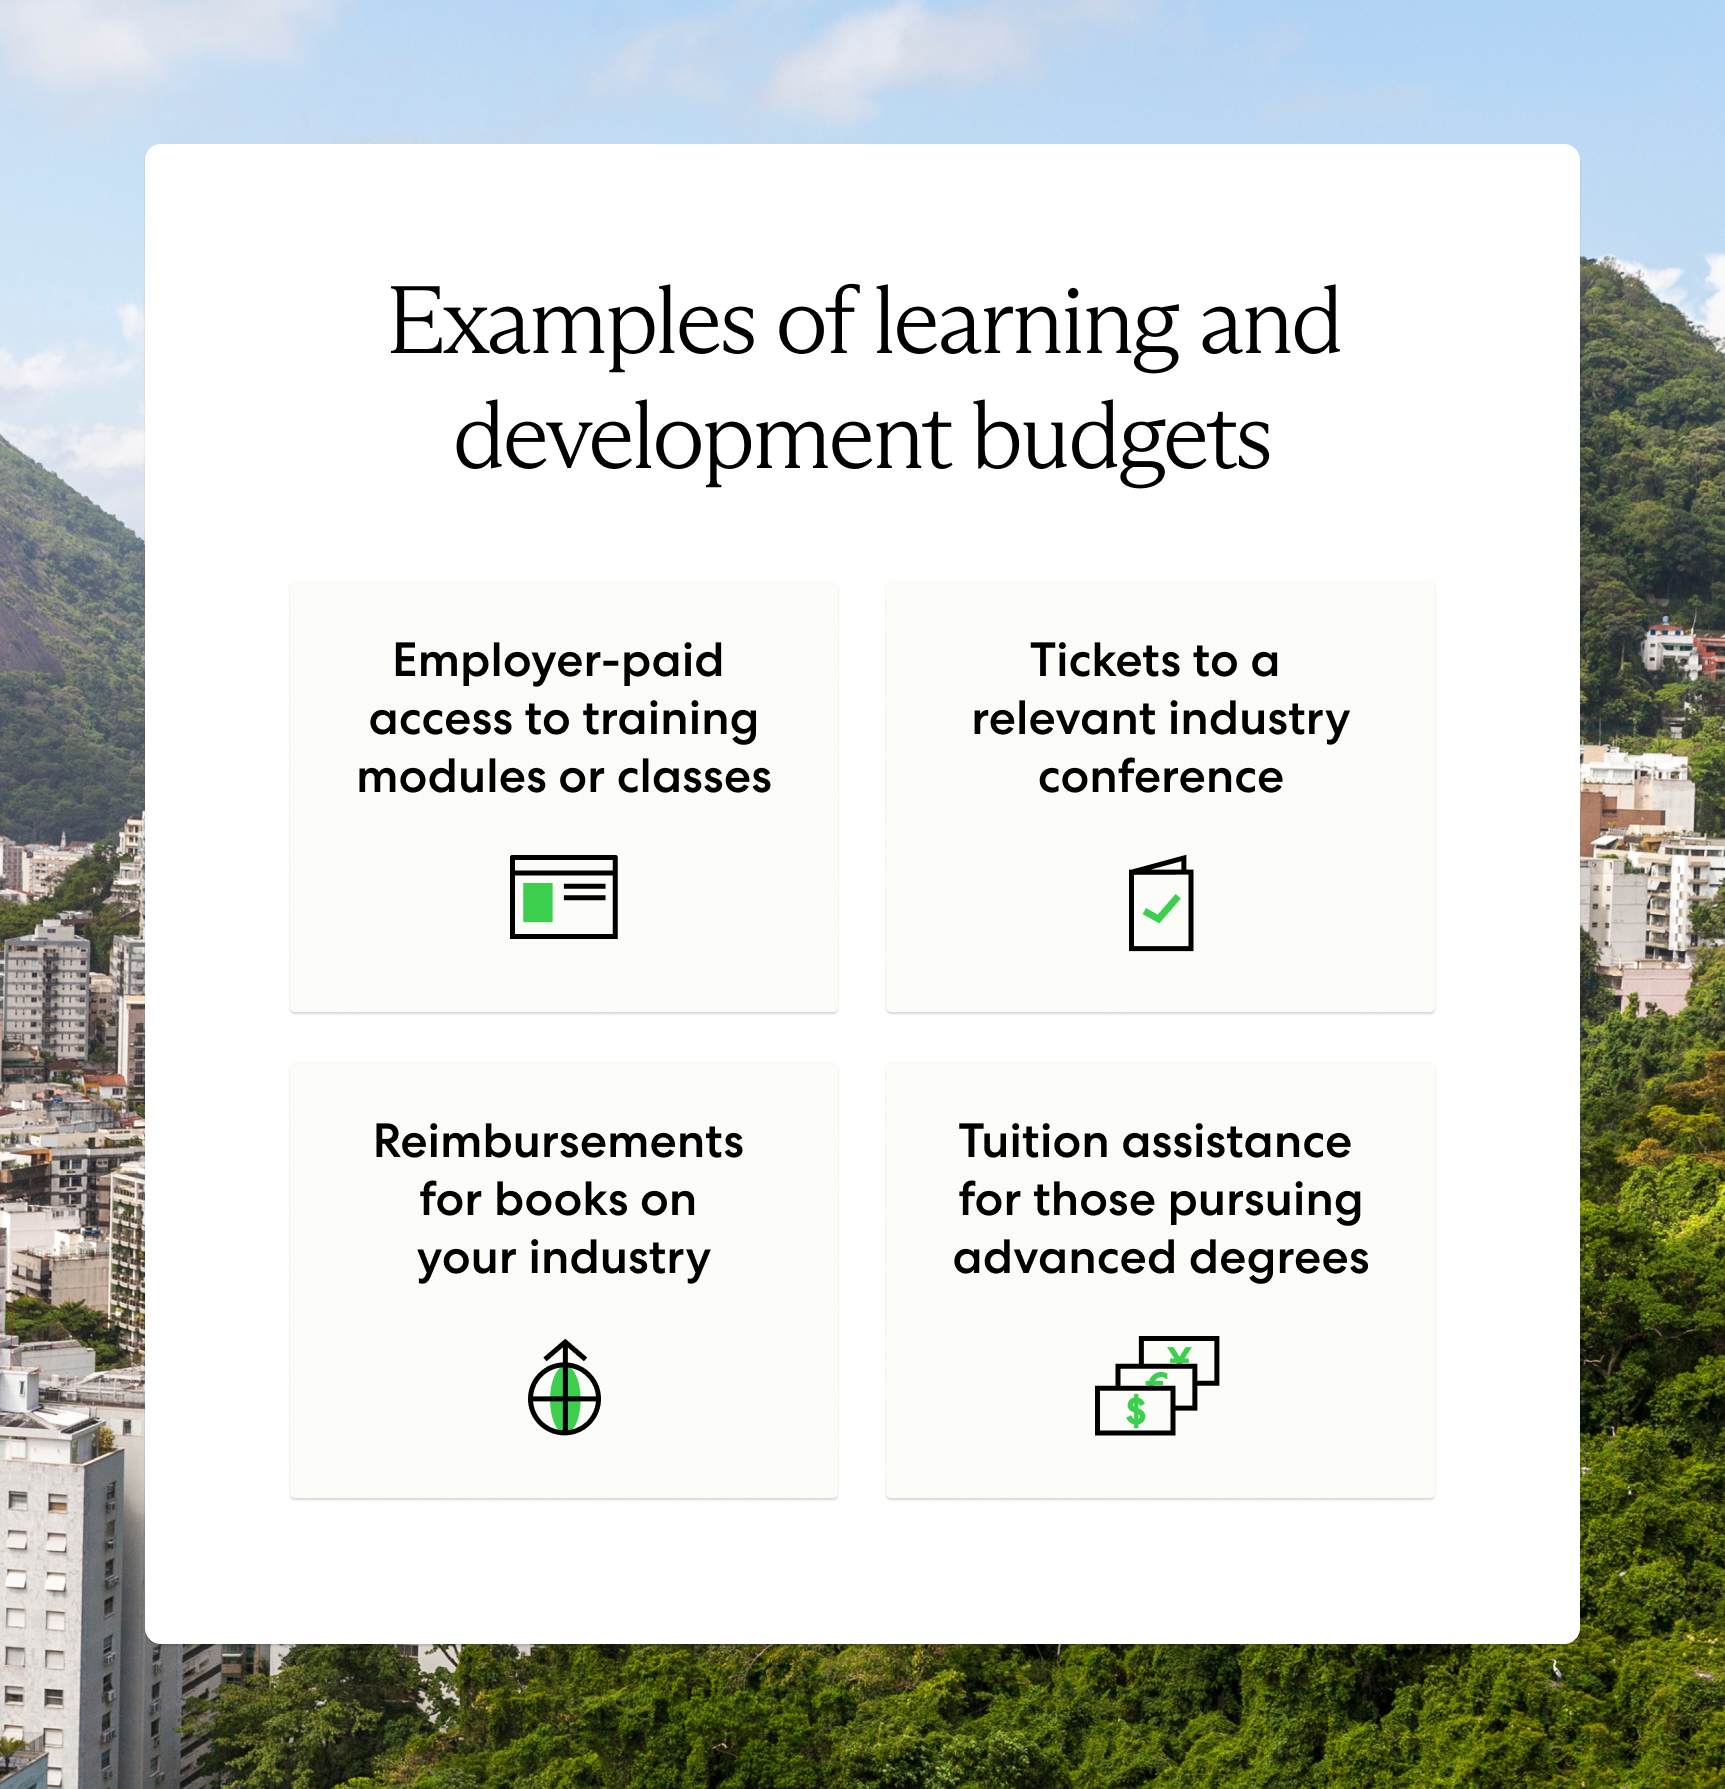 Employer paid training classes and conference tickets are examples of learning and development budgets